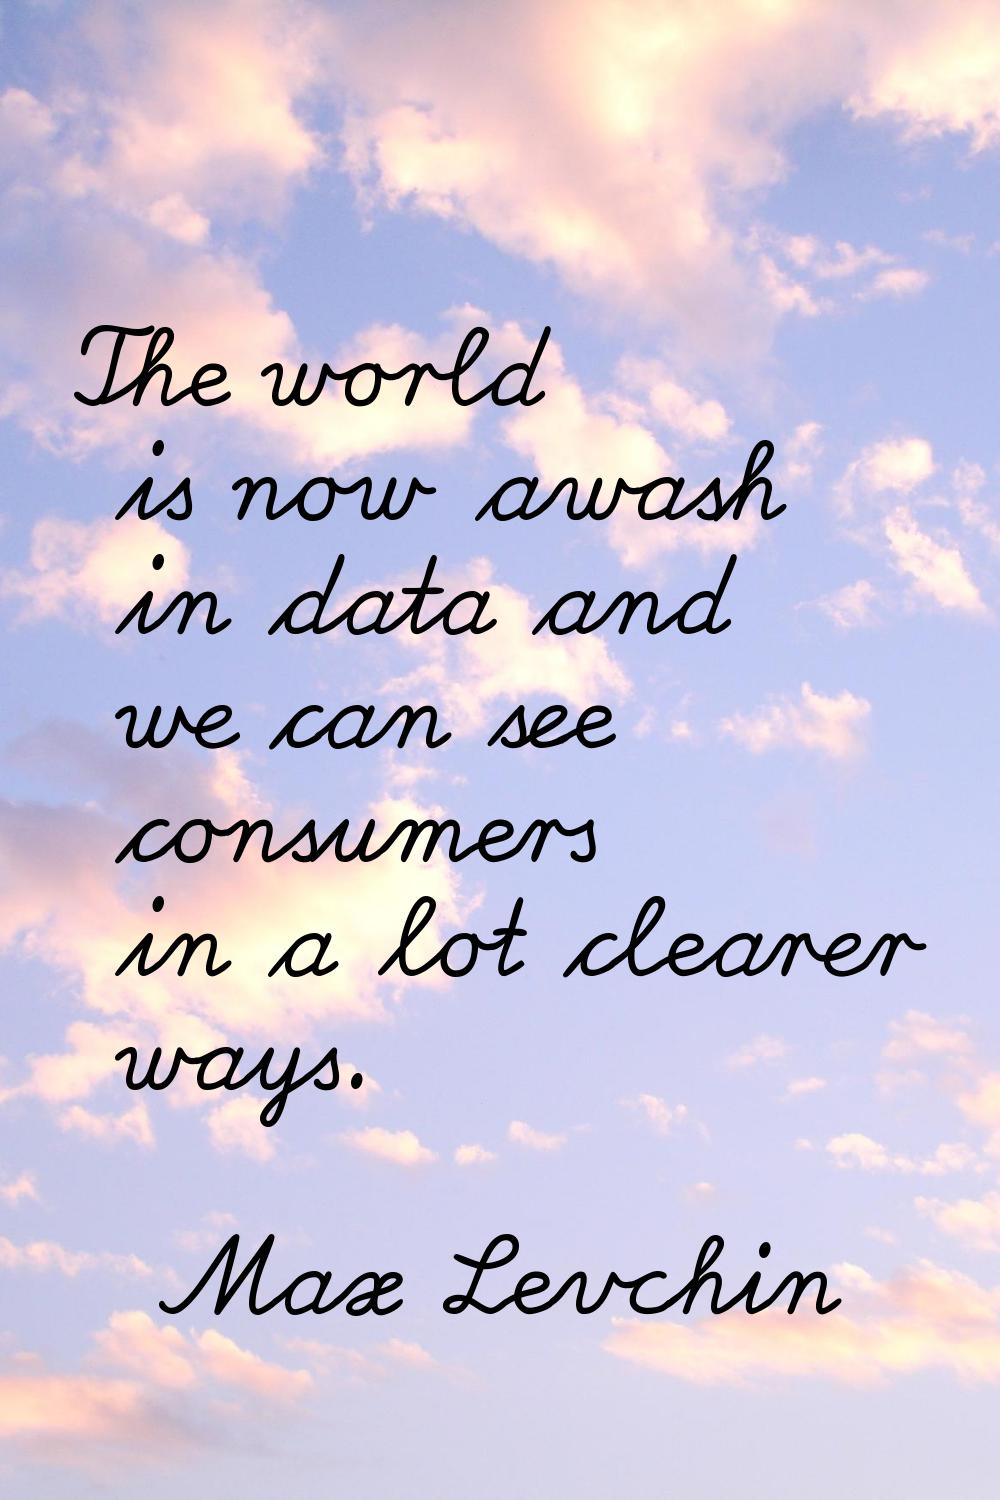 The world is now awash in data and we can see consumers in a lot clearer ways.